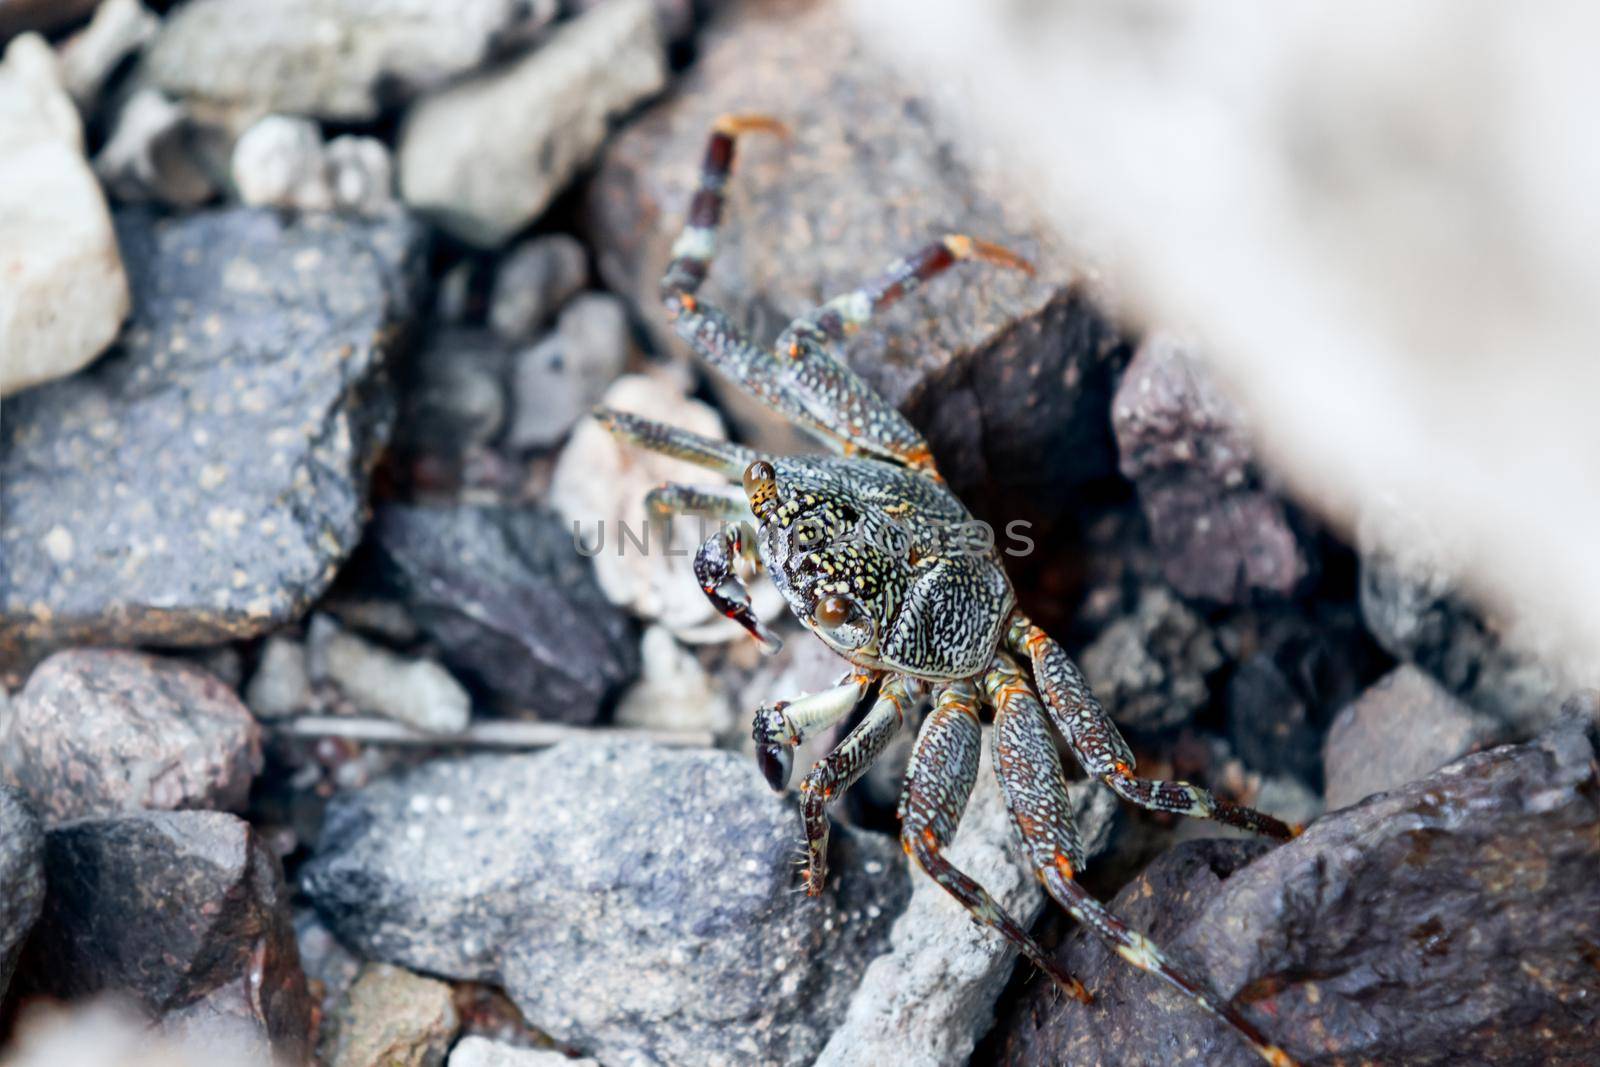 Crab hides among rocks on beach. Color of crab coincides with color of stones on coast. Mimicry in nature.